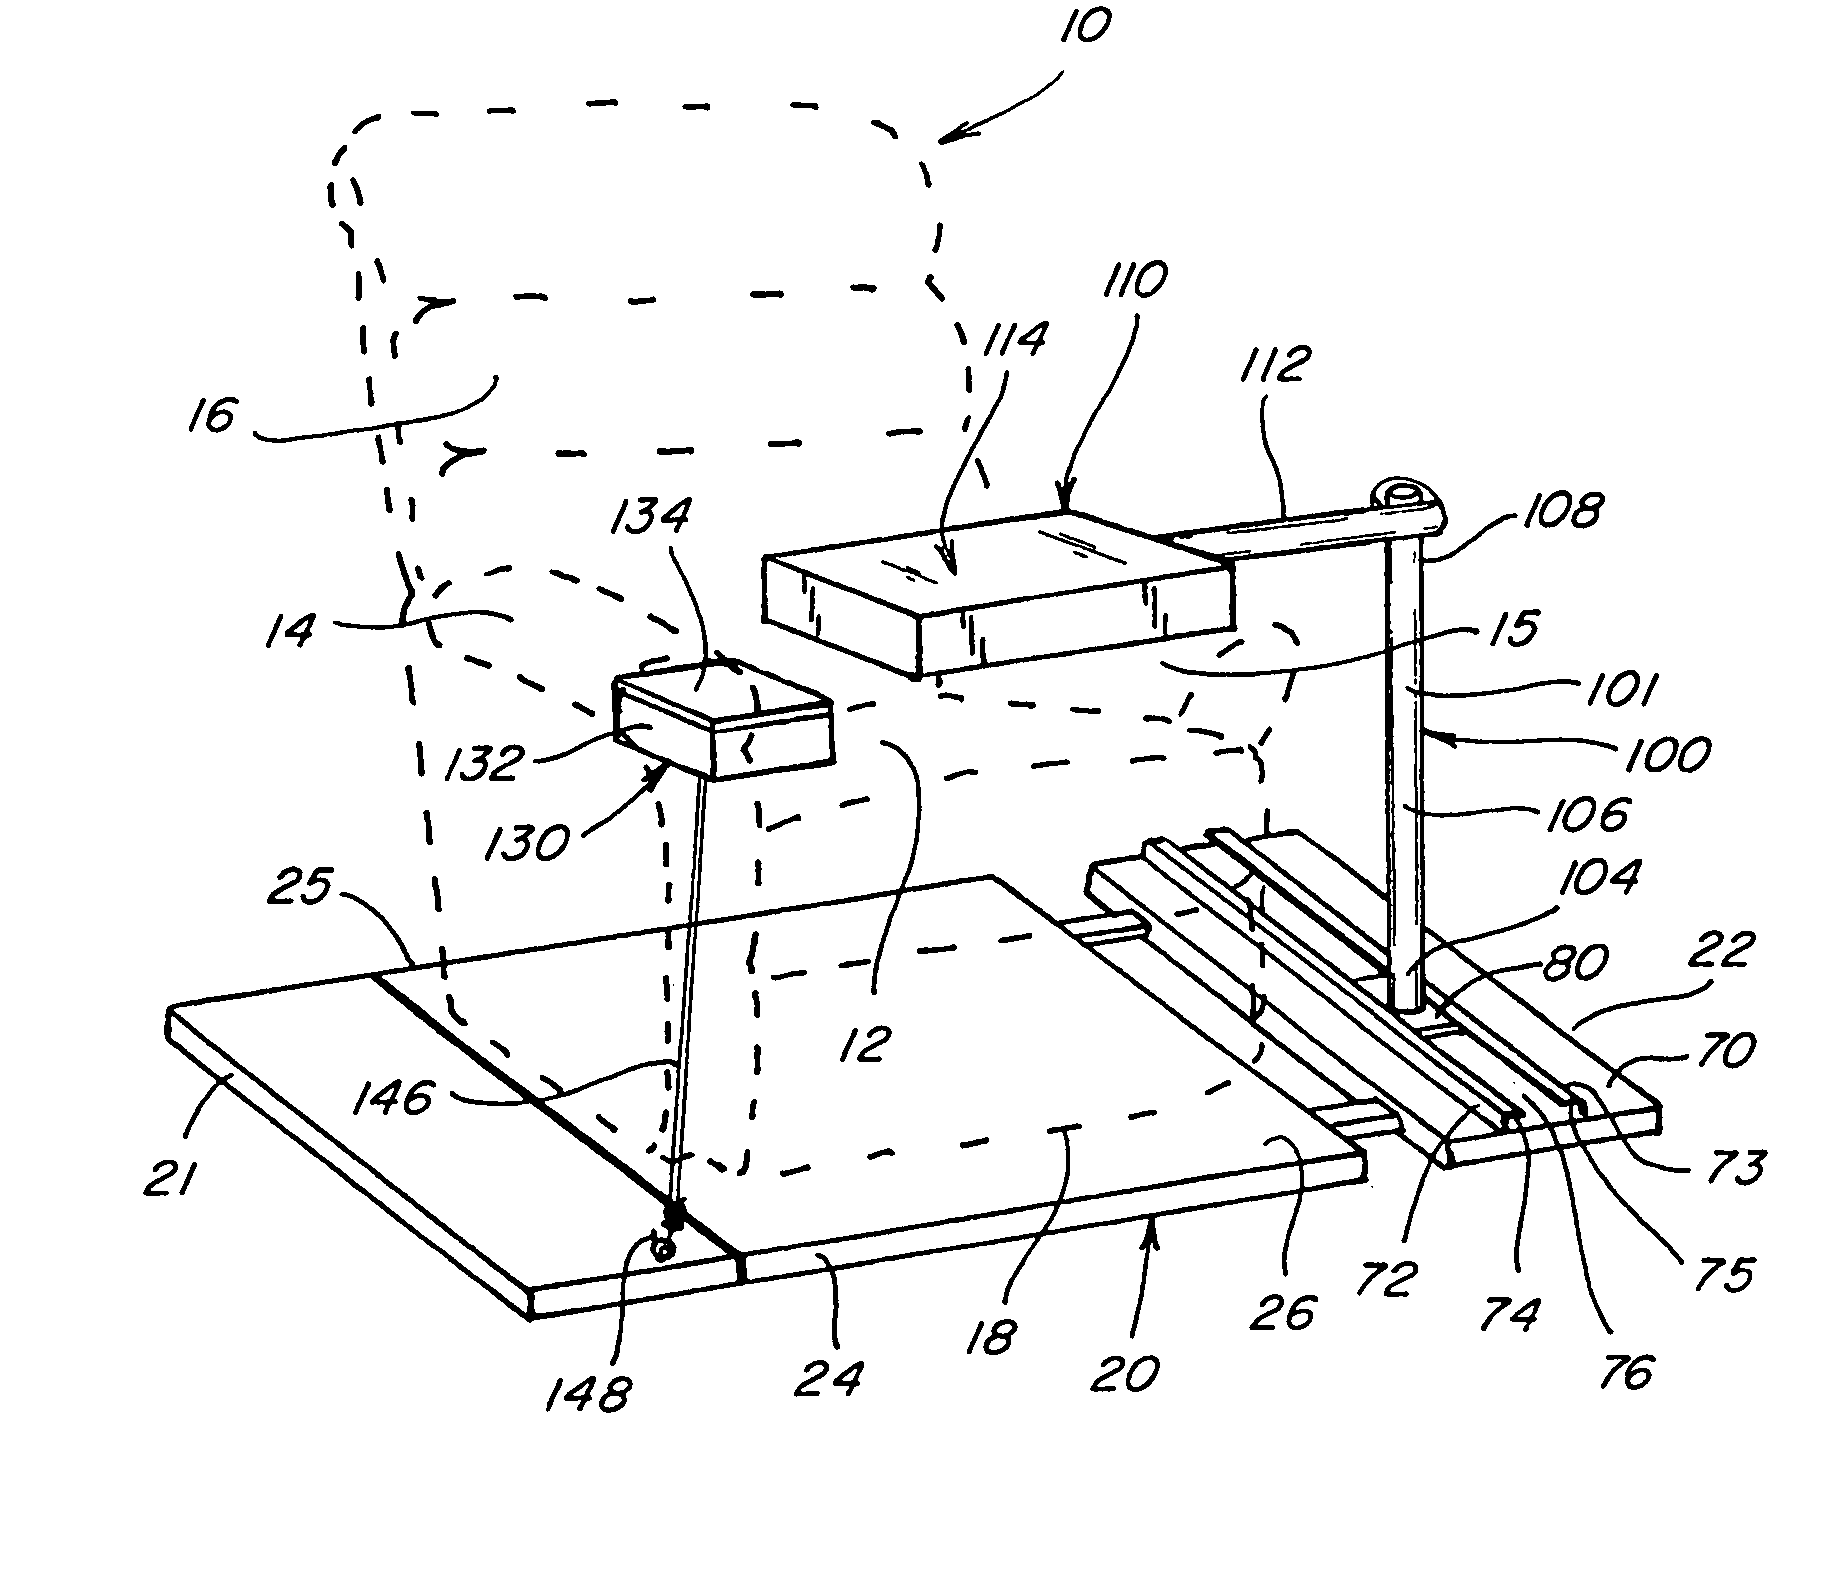 Apparatus for converting an armchair for use as a computer workplace